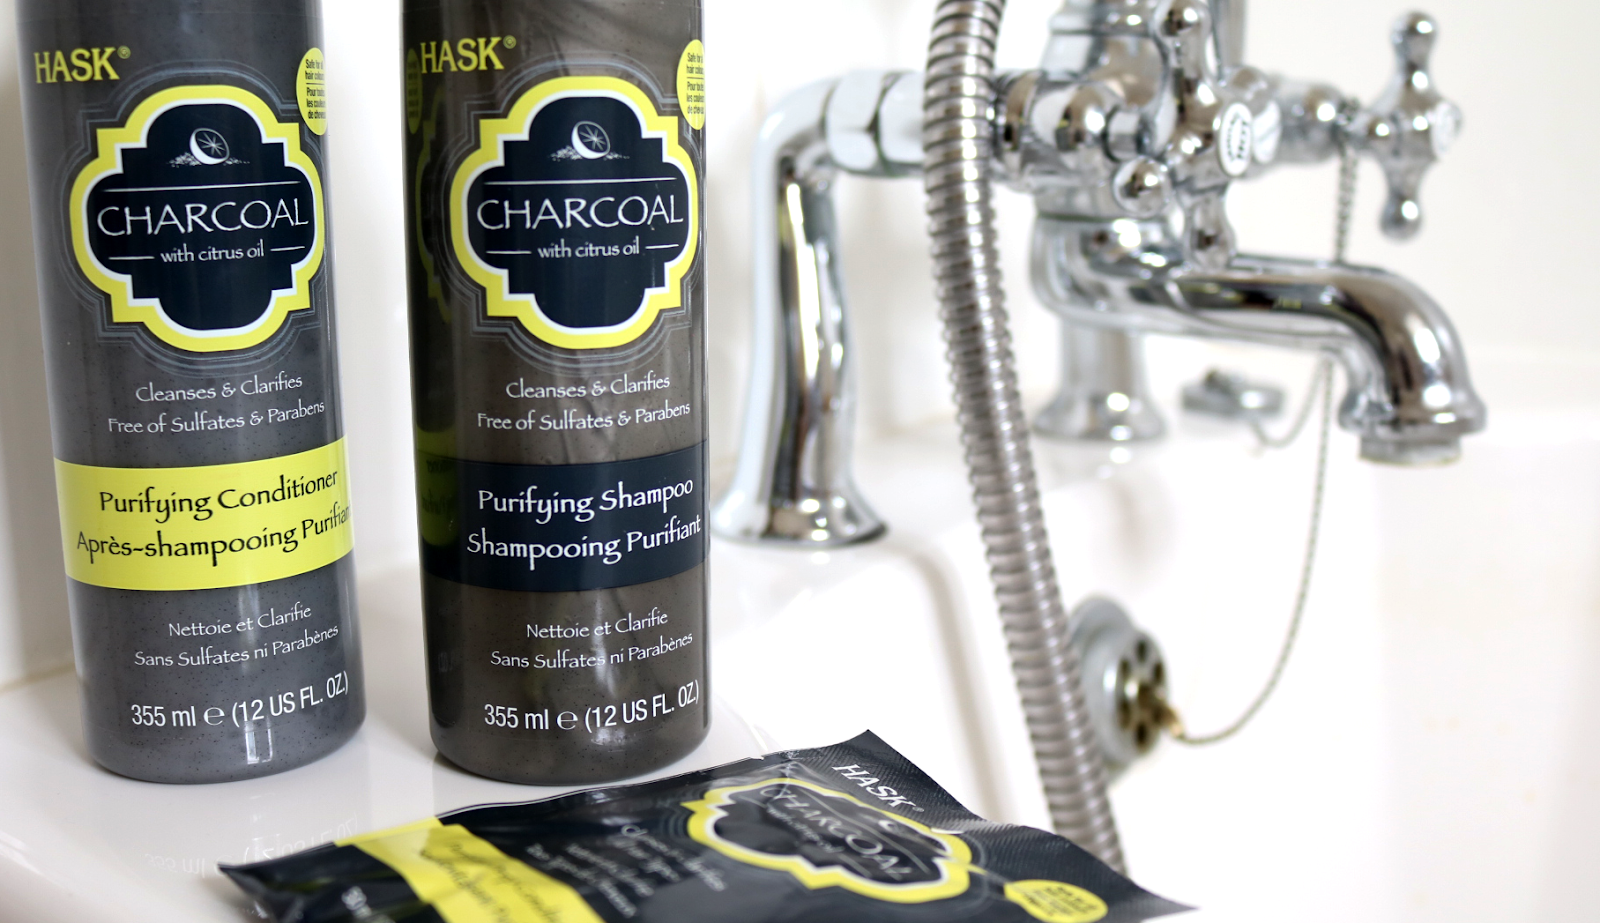 HASK Charcoal Purifying Shampoo & Conditoner + Unwined Deep Conditioners review